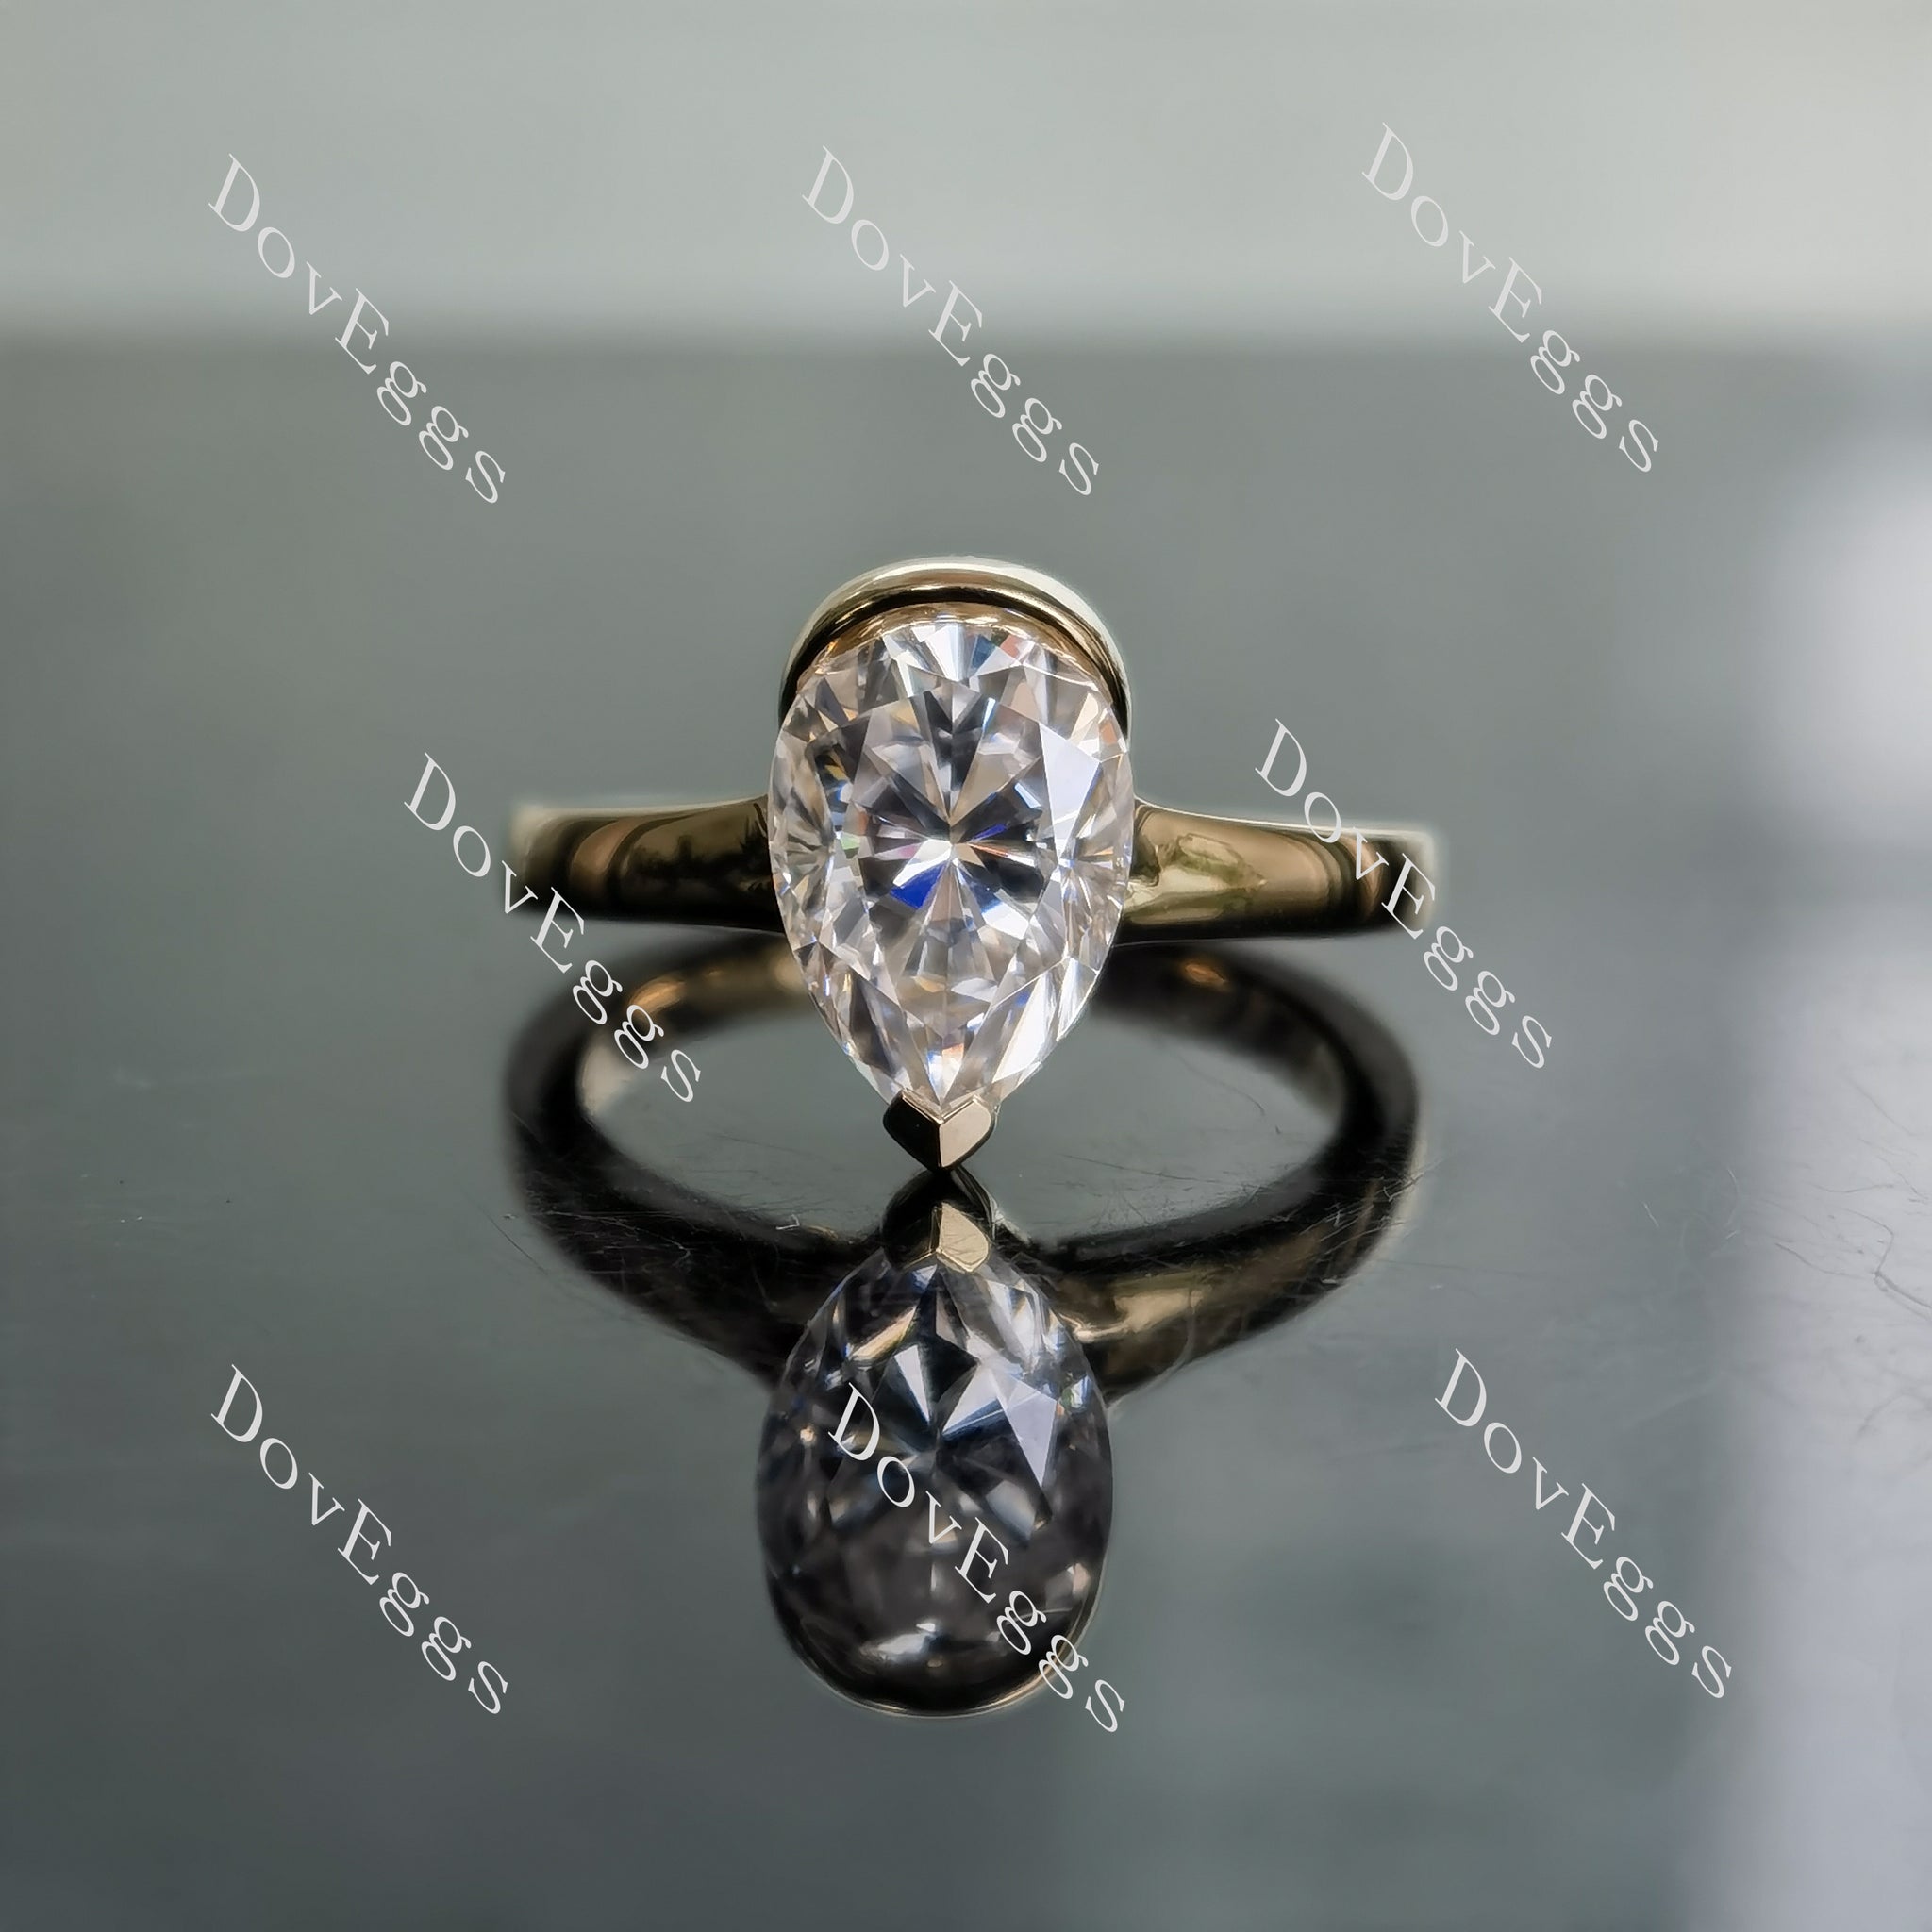 Kindal pear solitaire moissanite engagement ring